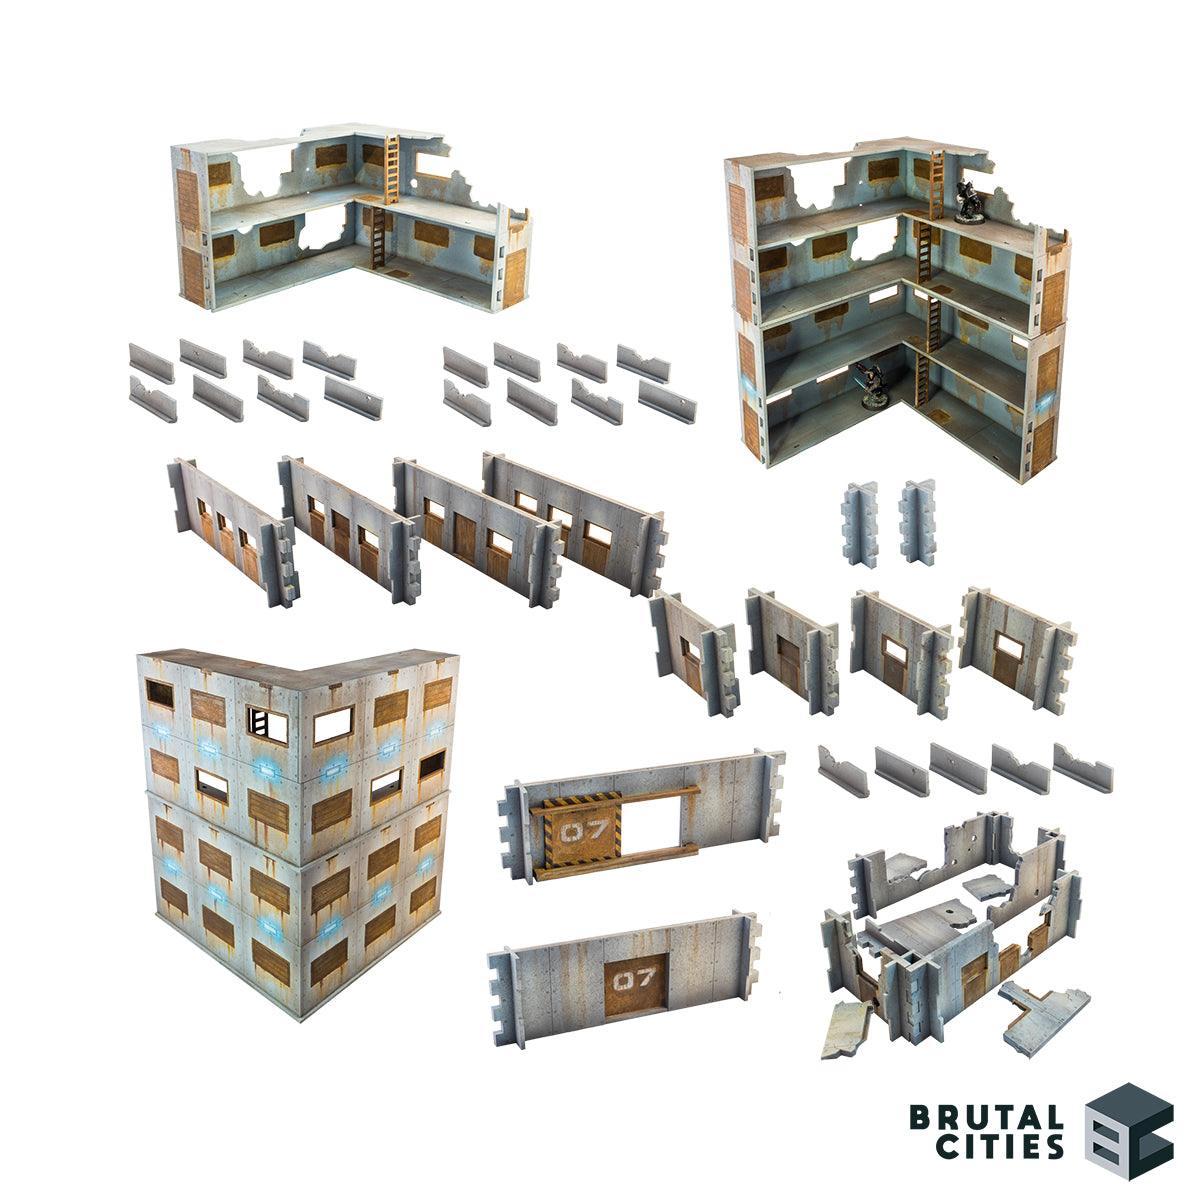 MDF terrain bundle with bunker walls, concrete walls, ruined buildings and 4 story high ruins with ladders